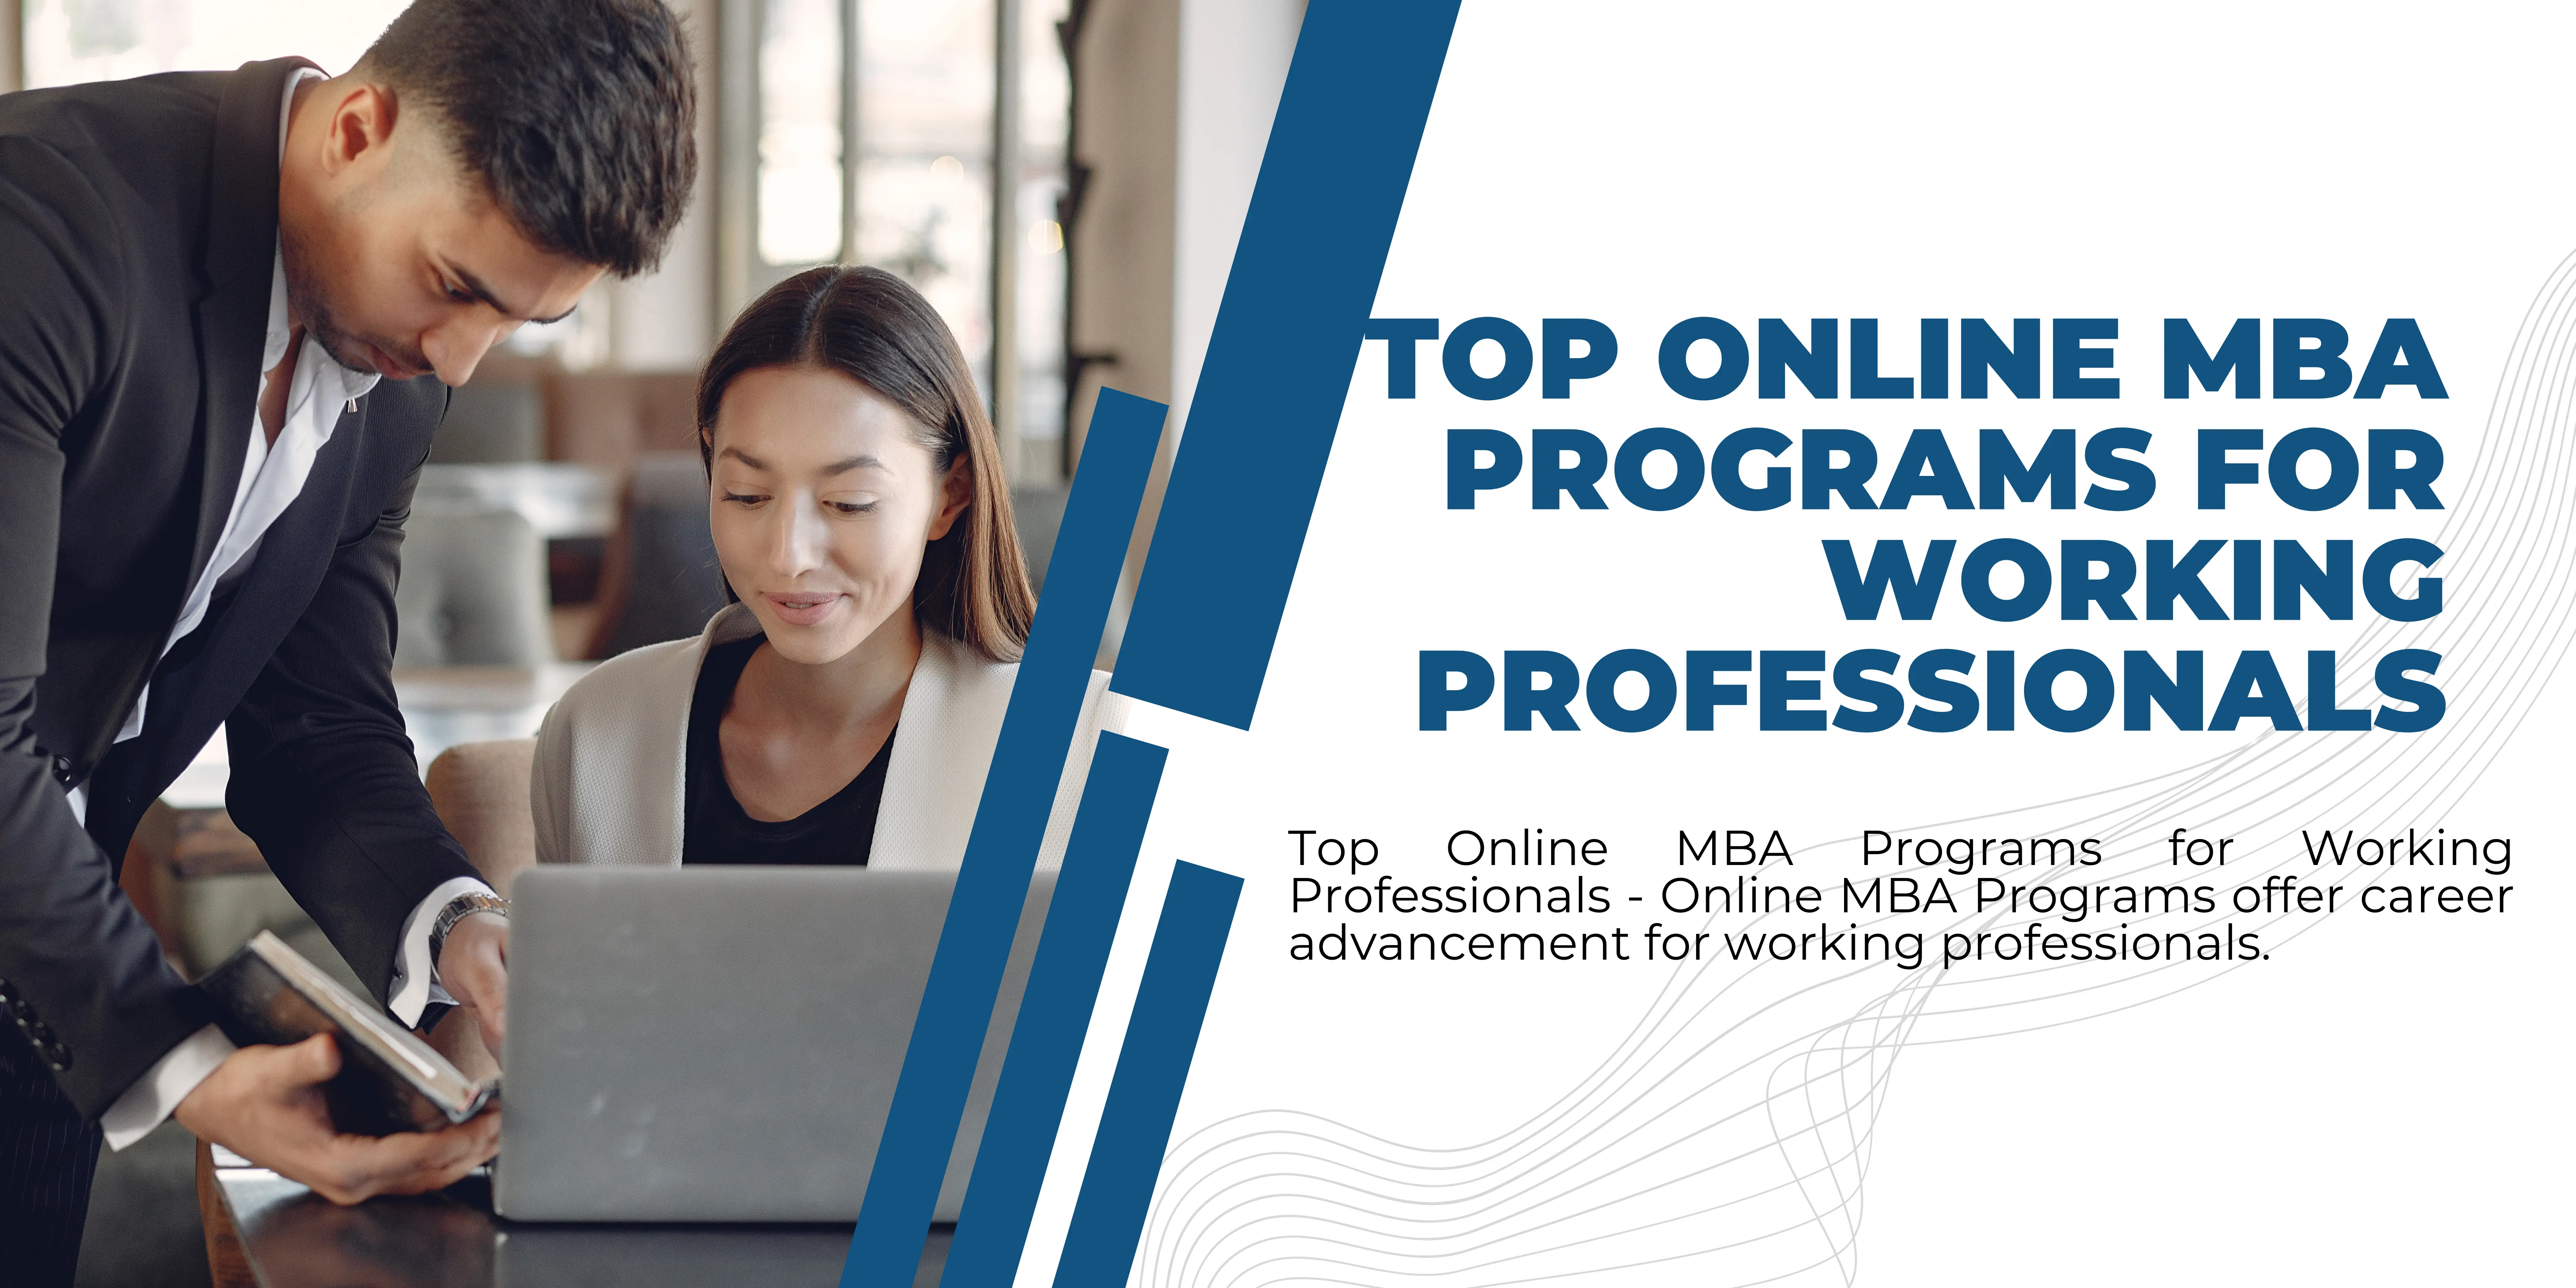 Top Online MBA Programs for Working Professionals